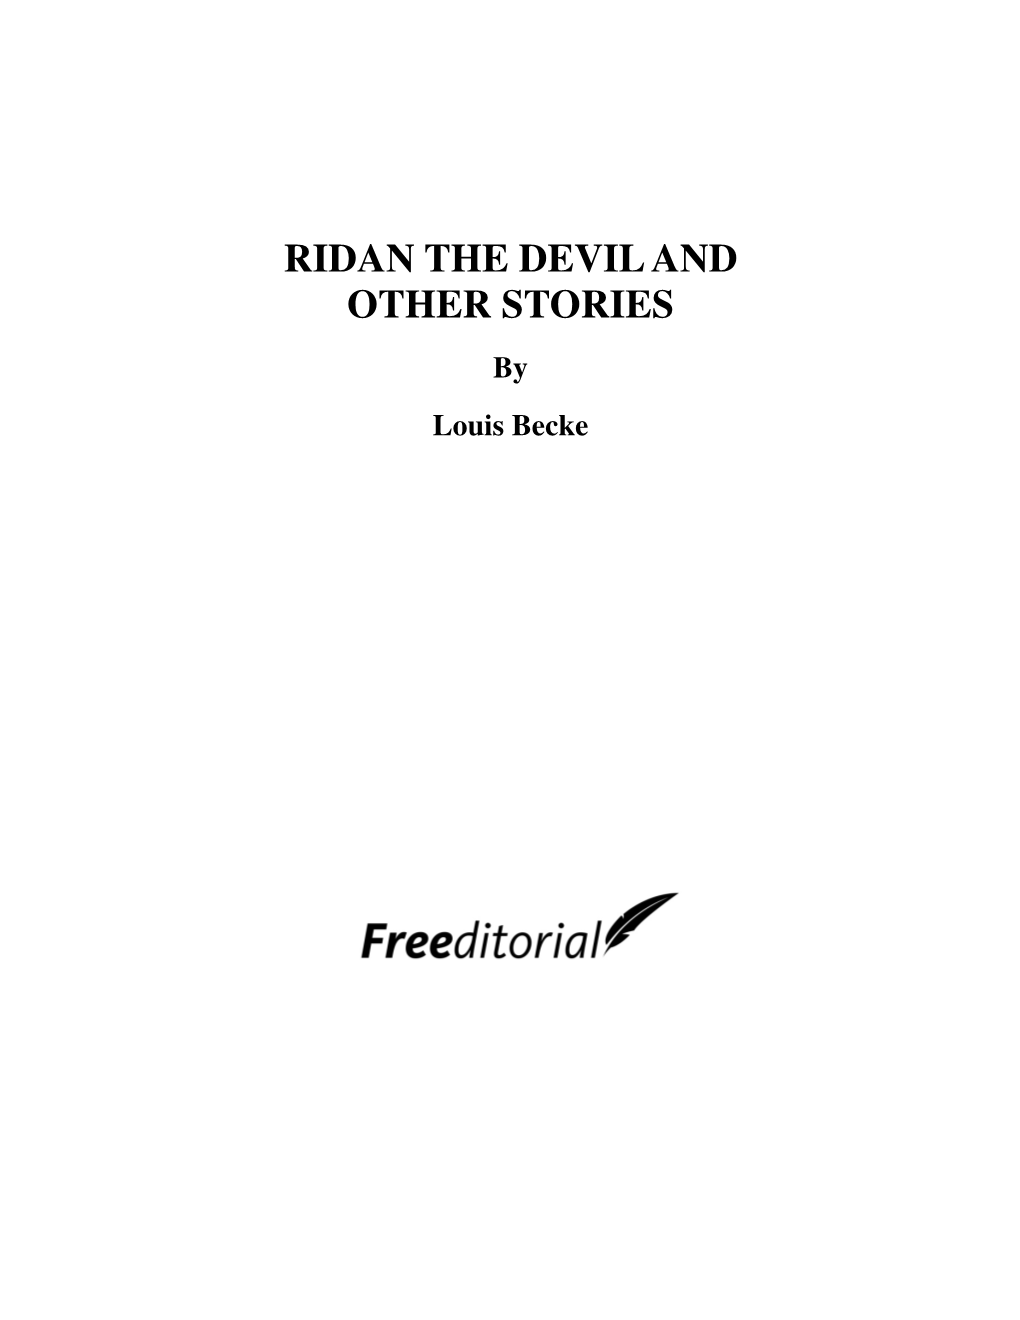 RIDAN the DEVIL and OTHER STORIES by Louis Becke